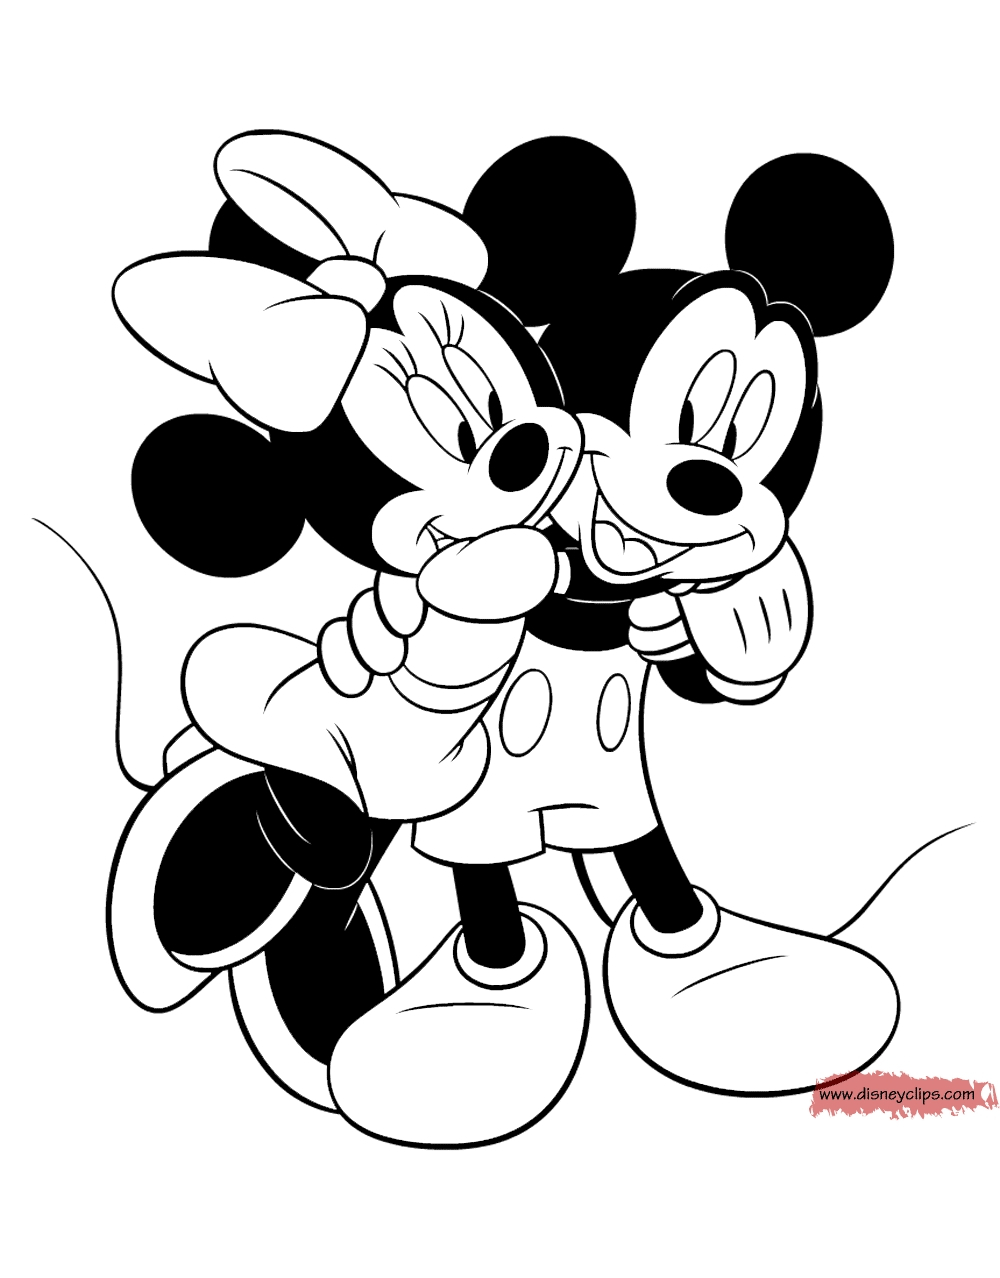 Mickey Mouse Coloring Page Mickey And Minnie Mouse Coloring Pages Free